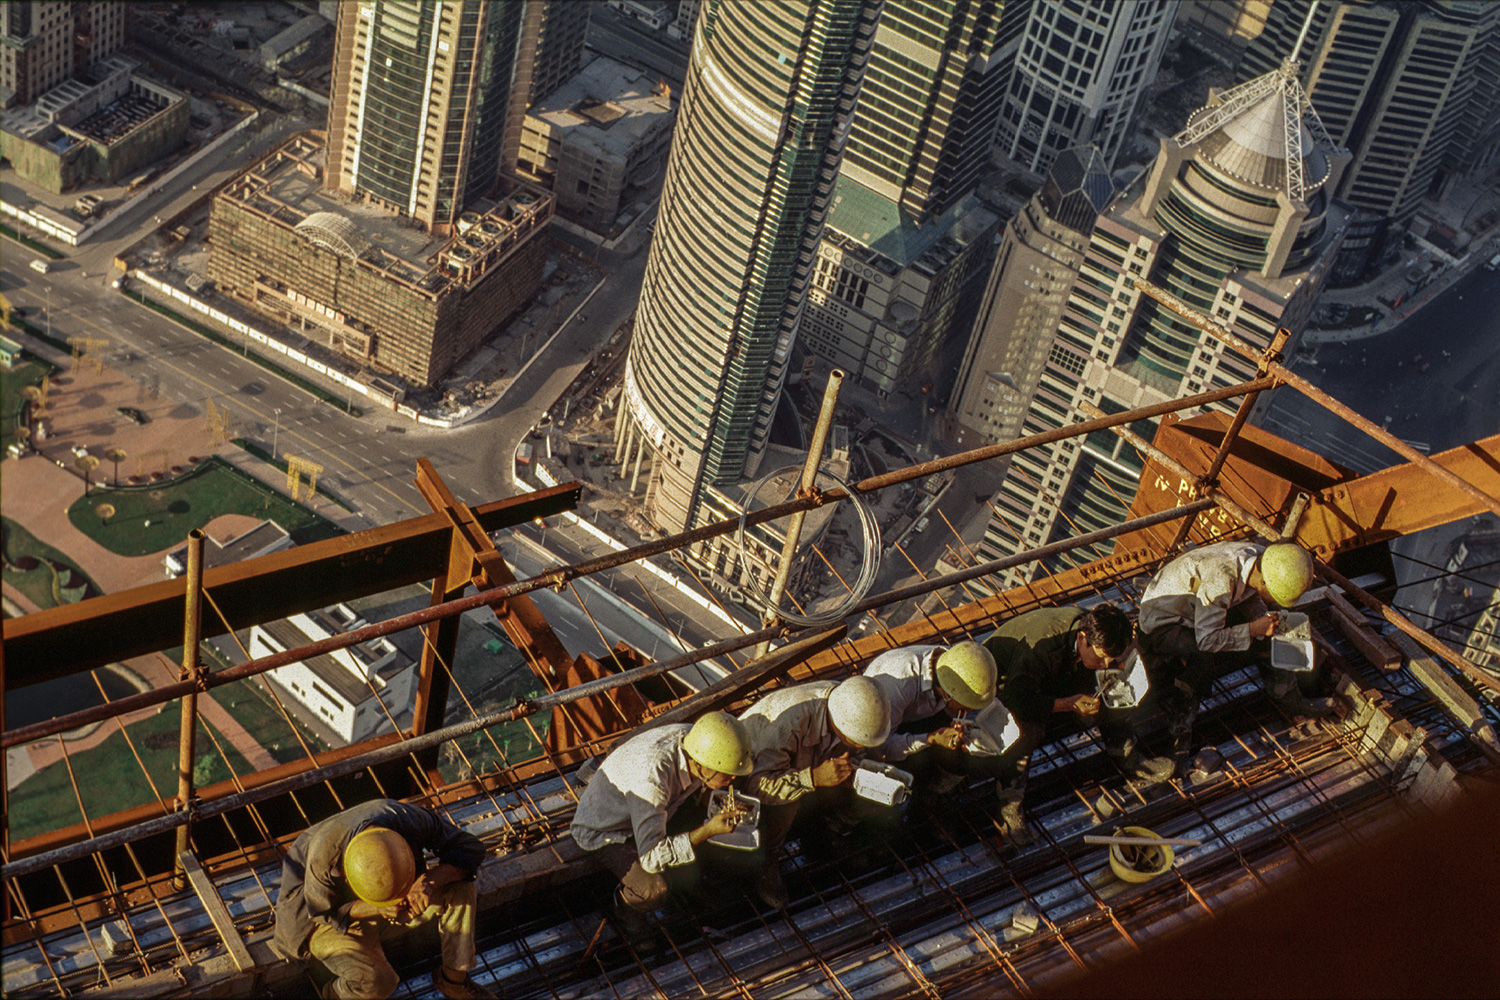 Construction workers take a break to eat boxed dinners high up on Jin Mao Tower, overlooking central Lujiazui, 1997.